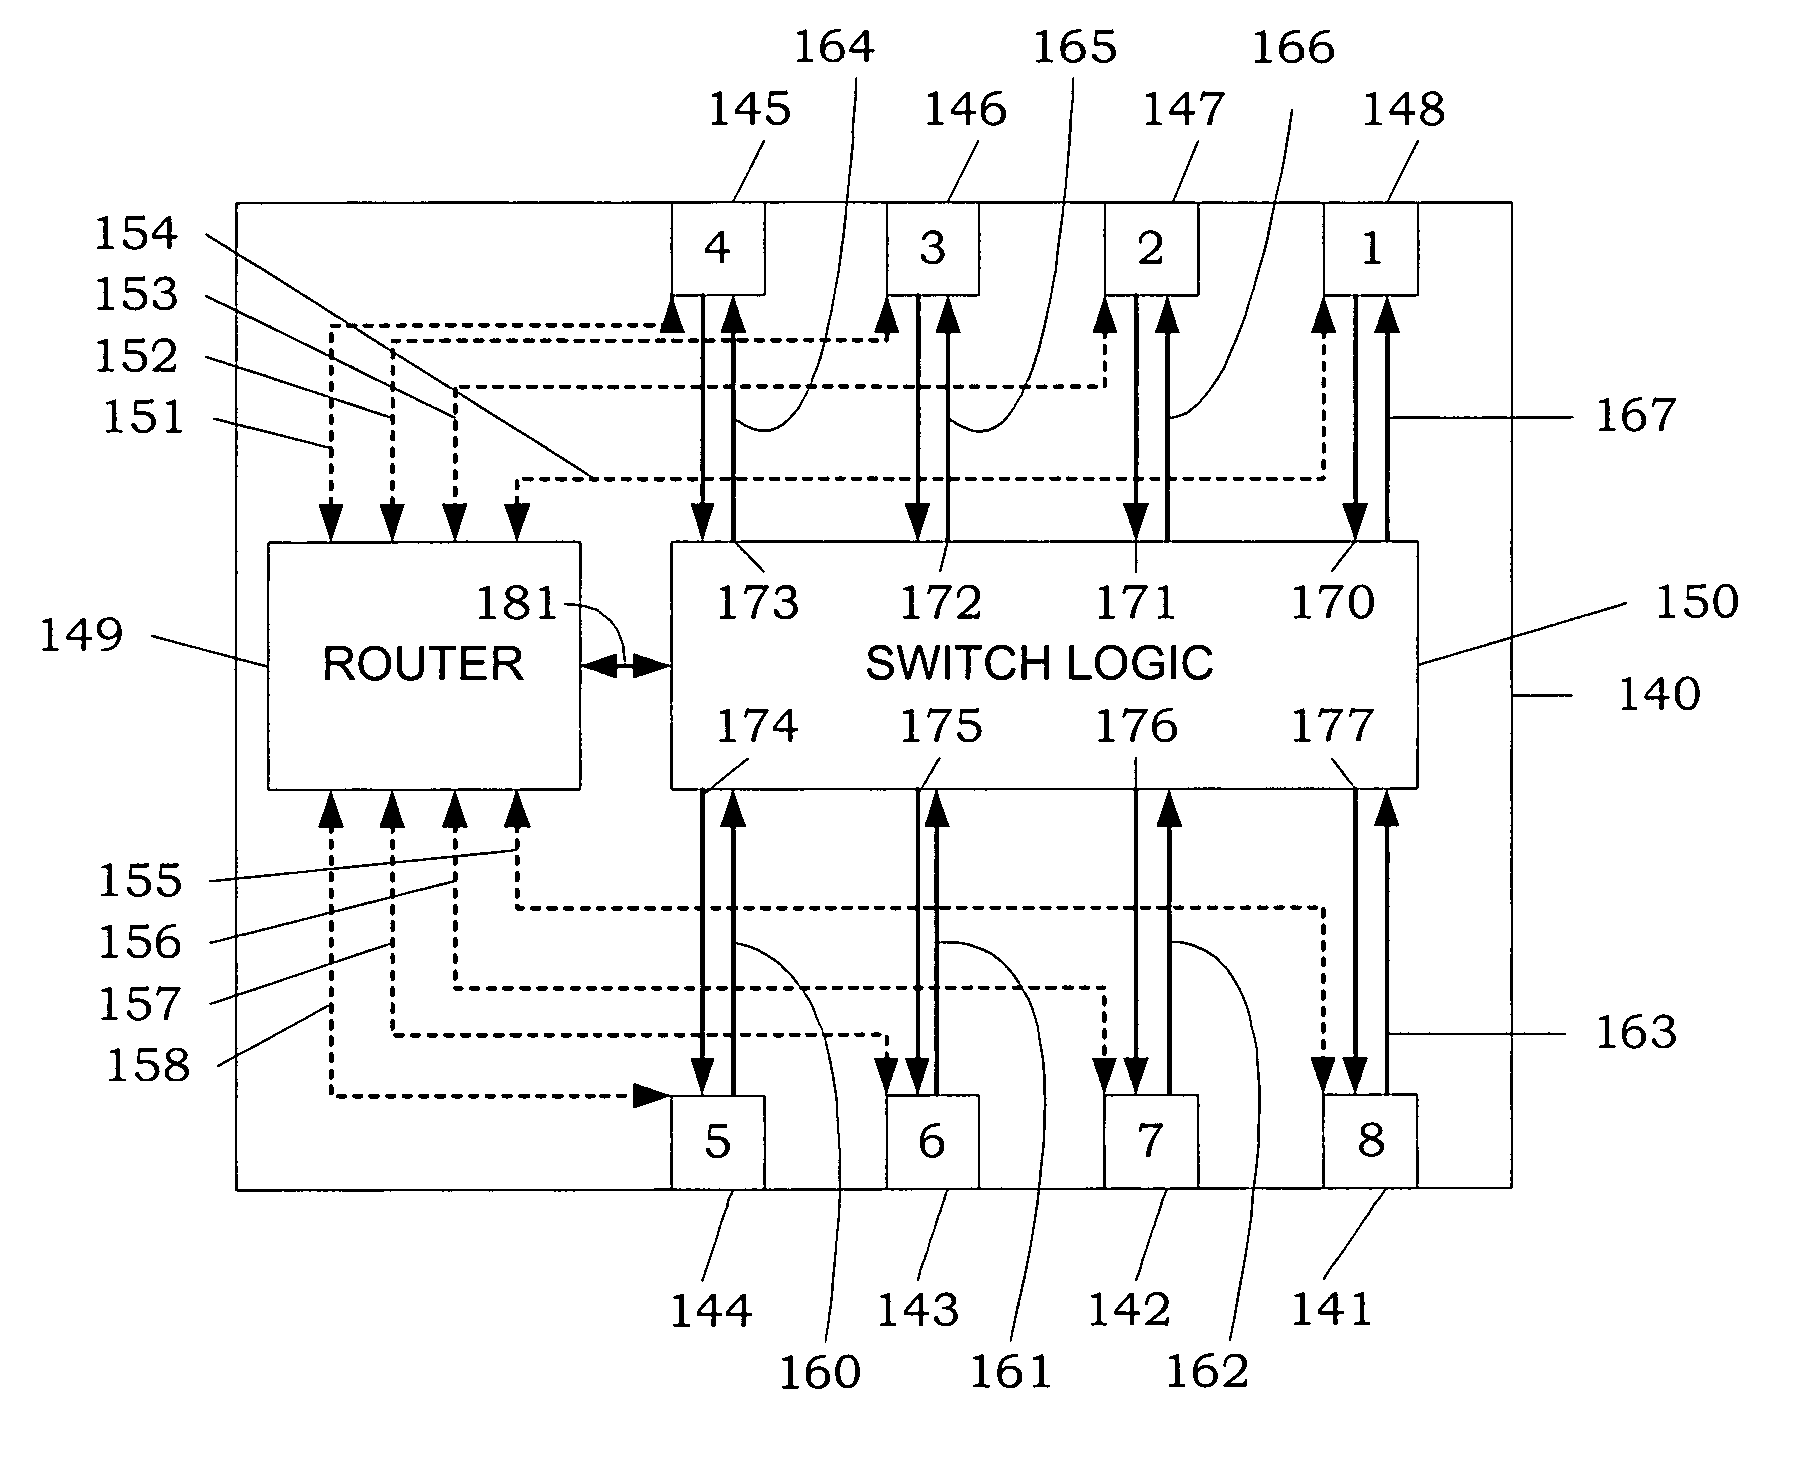 Methods and apparatus for switching fibre channel arbitrated loop systems